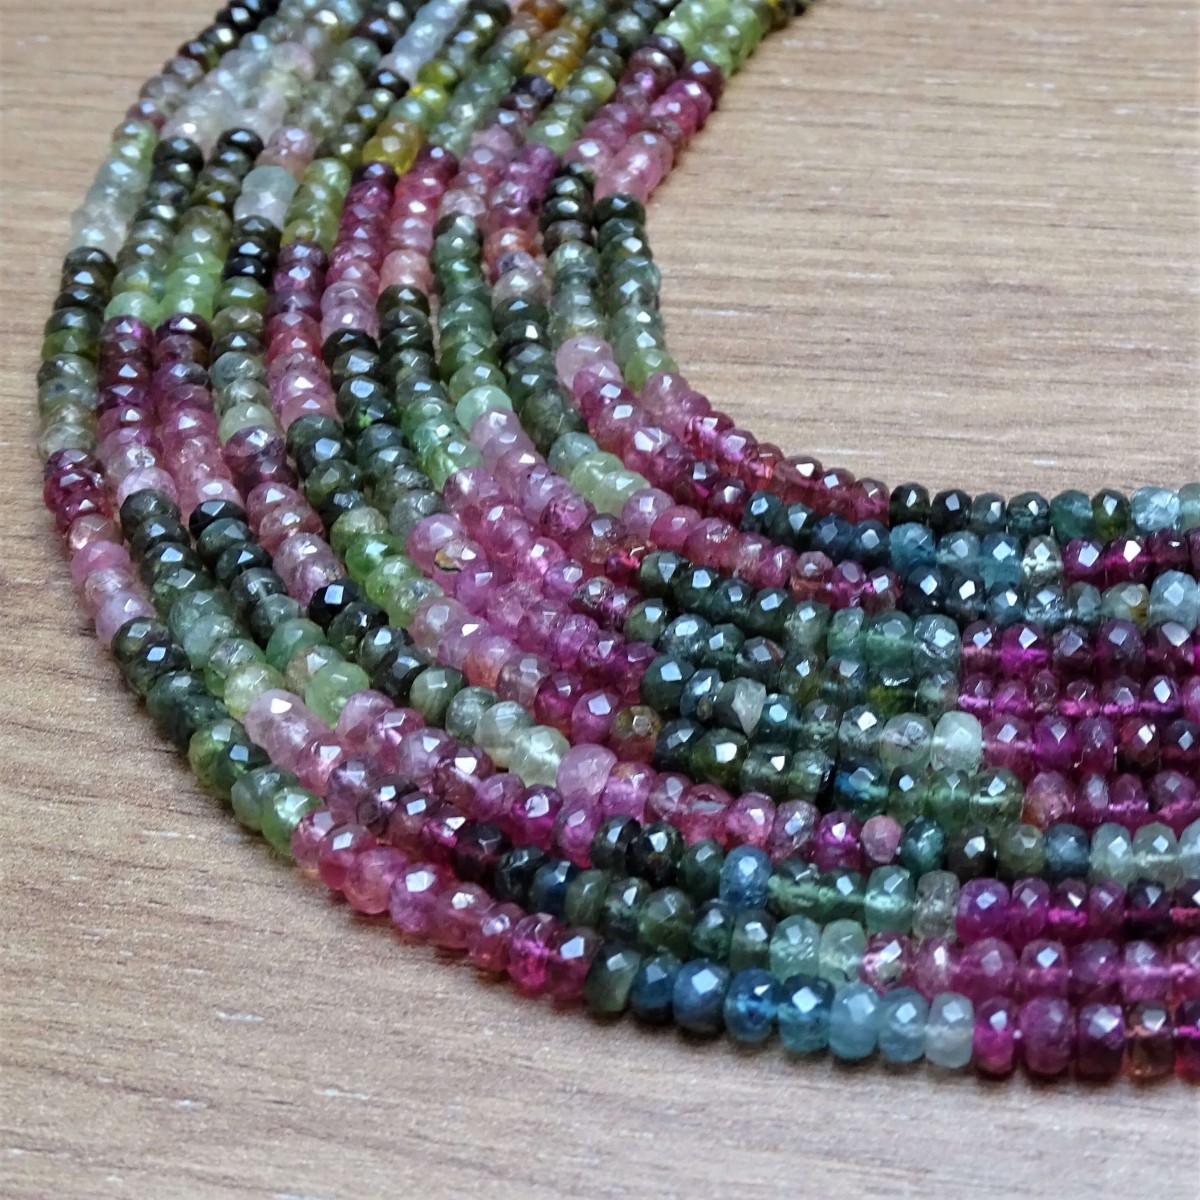 Quality Tourmaline Beads - Faceted Multicolor Tourmaline Beads